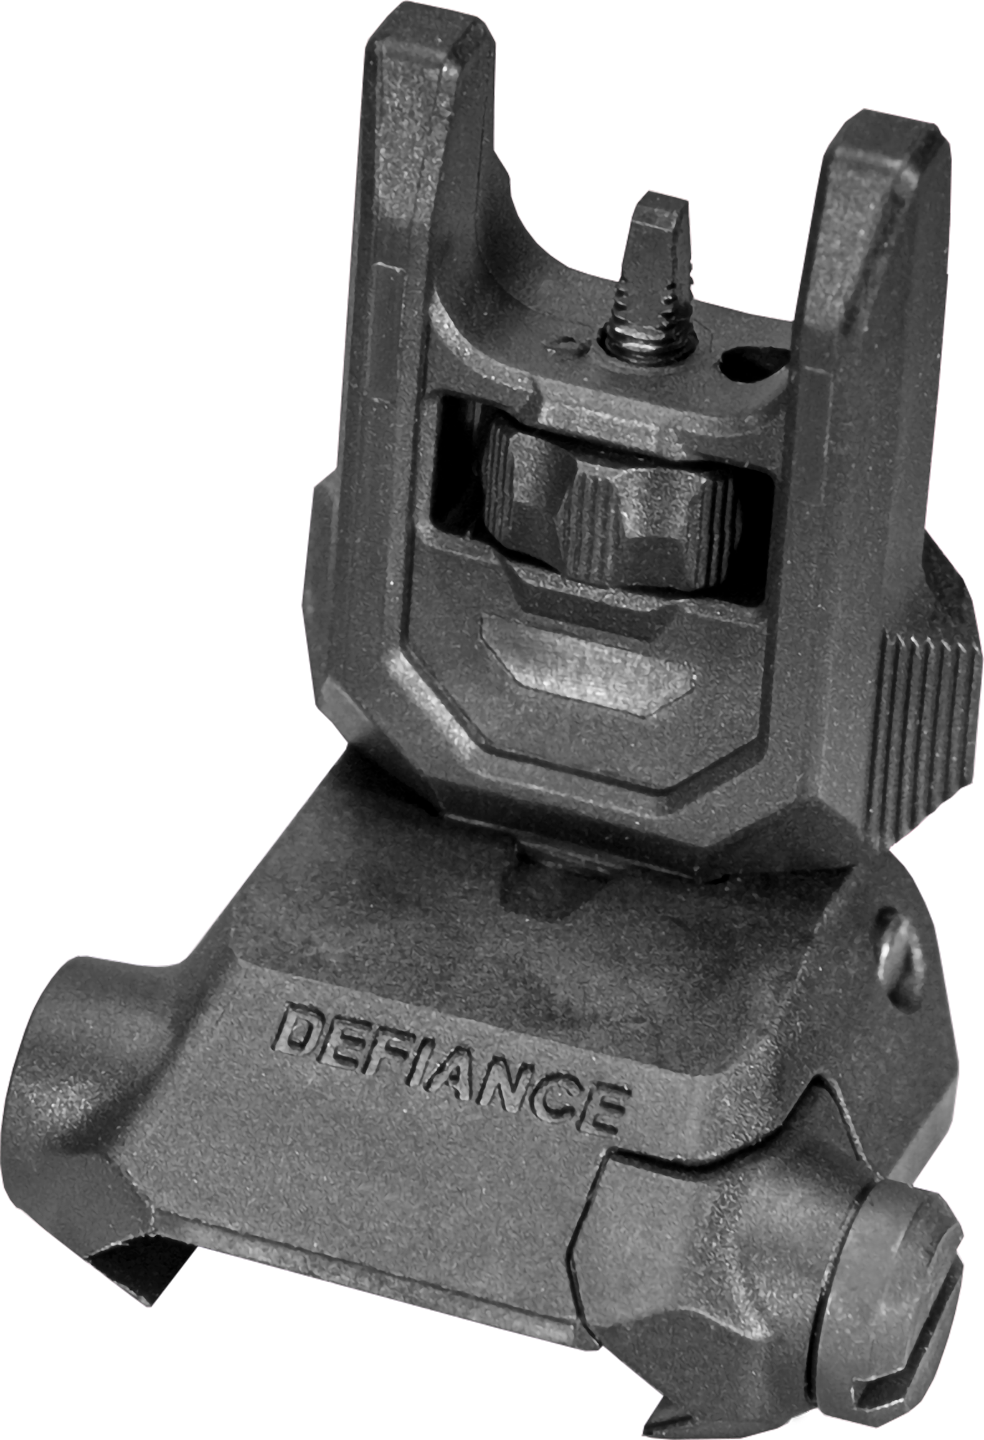 KRISS Polymer Front Sight